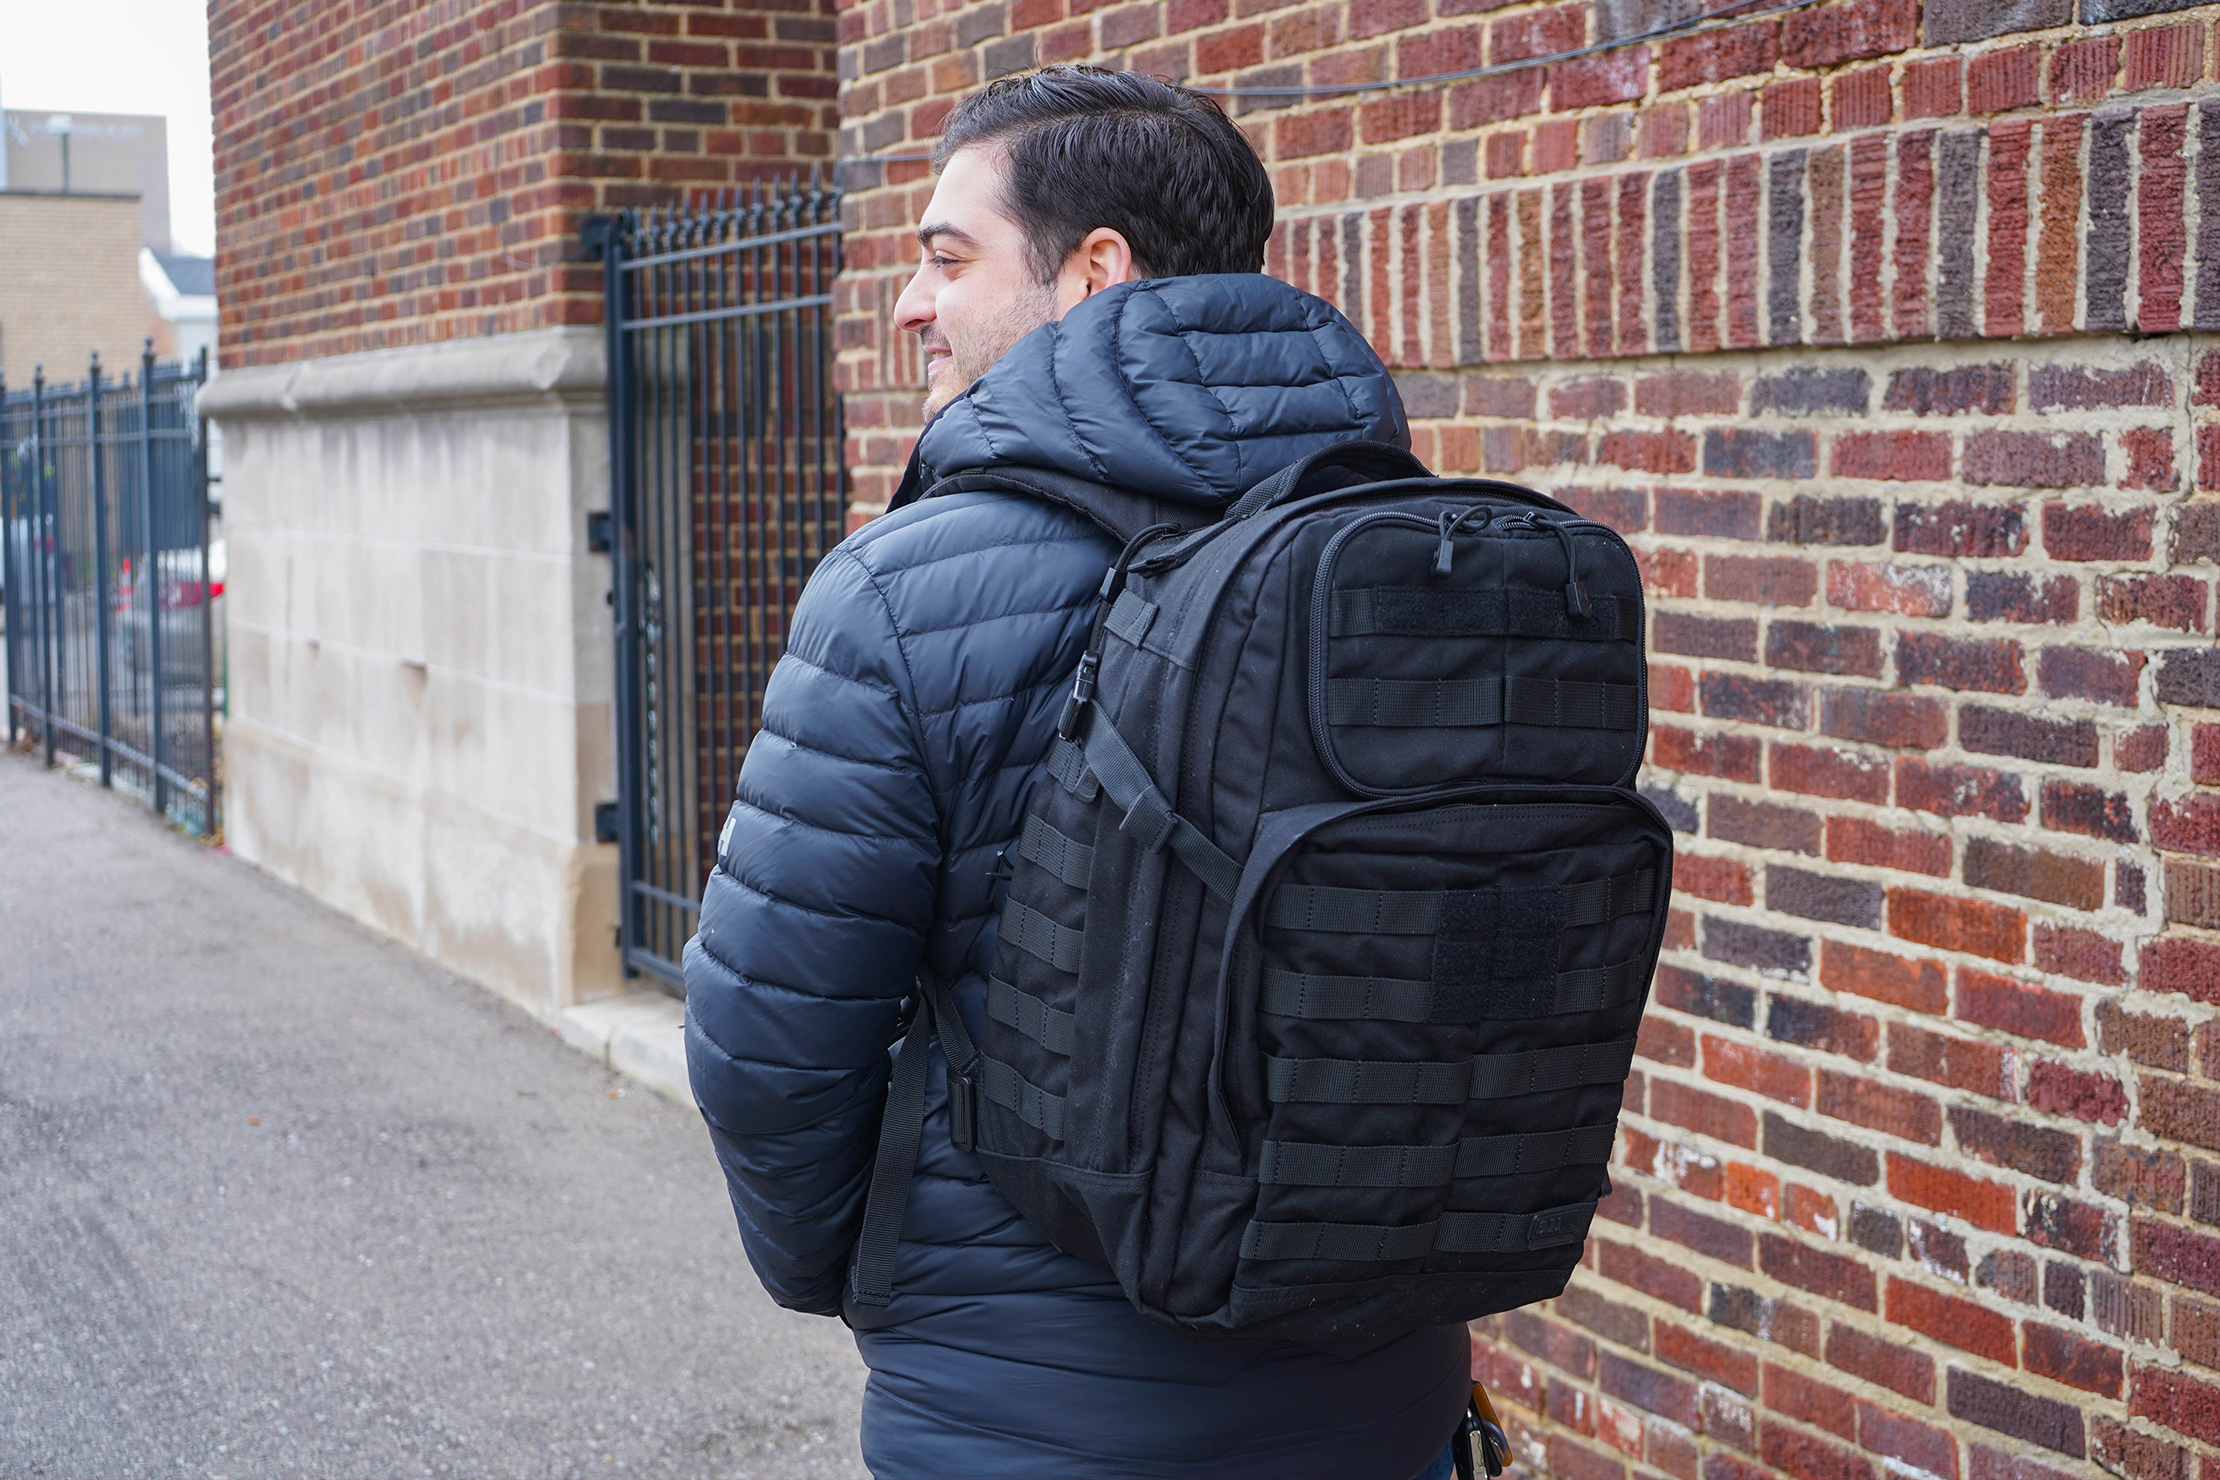 5.11 Tactical Rush 24 2.0 backpack review: pack on the pounds